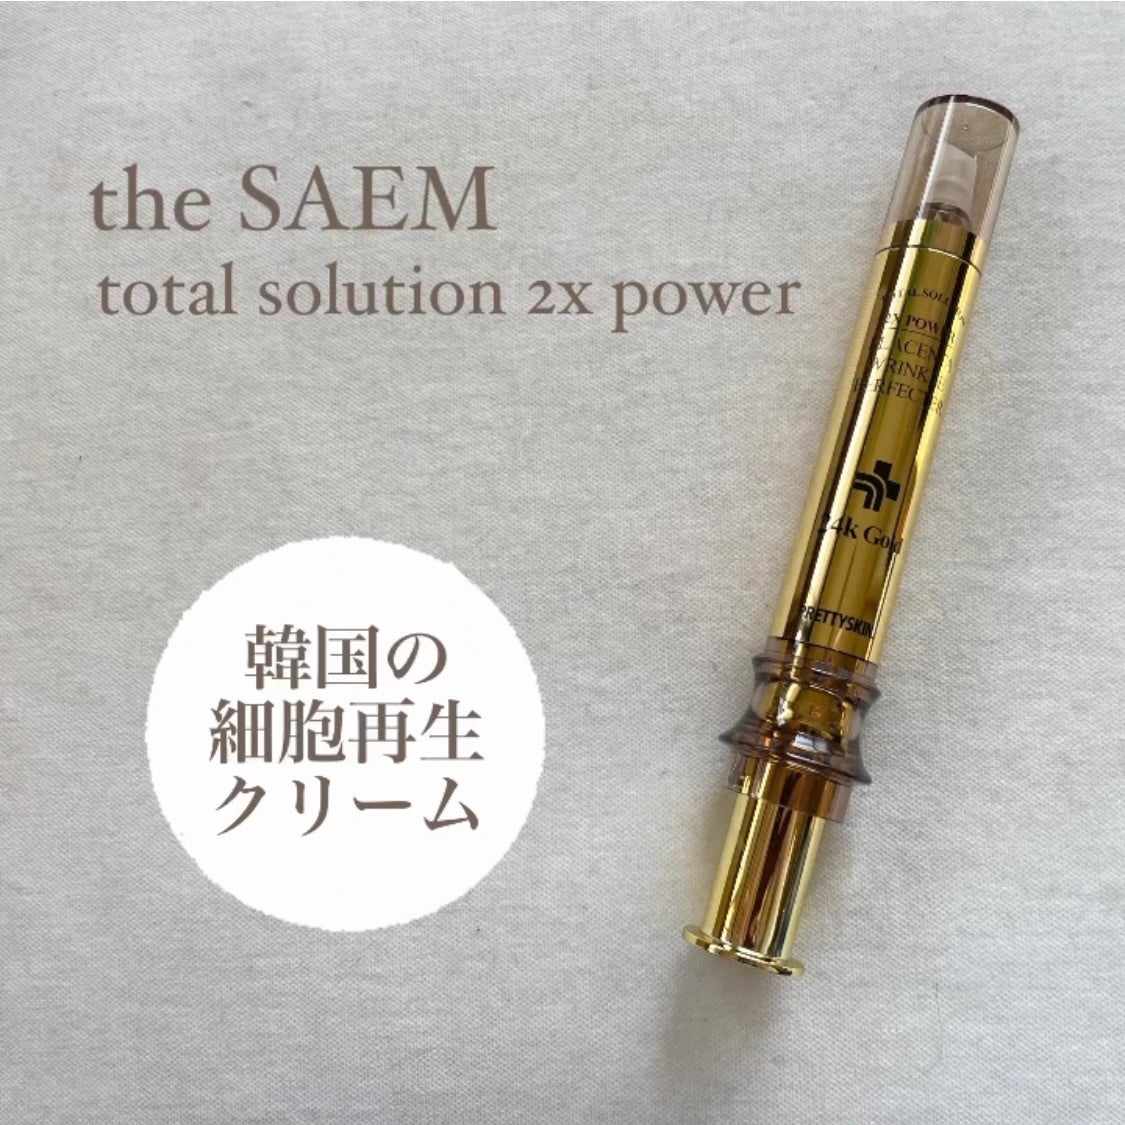 total solution 2x power｜the SAEMの効果に関する口コミ - the SAEM ...